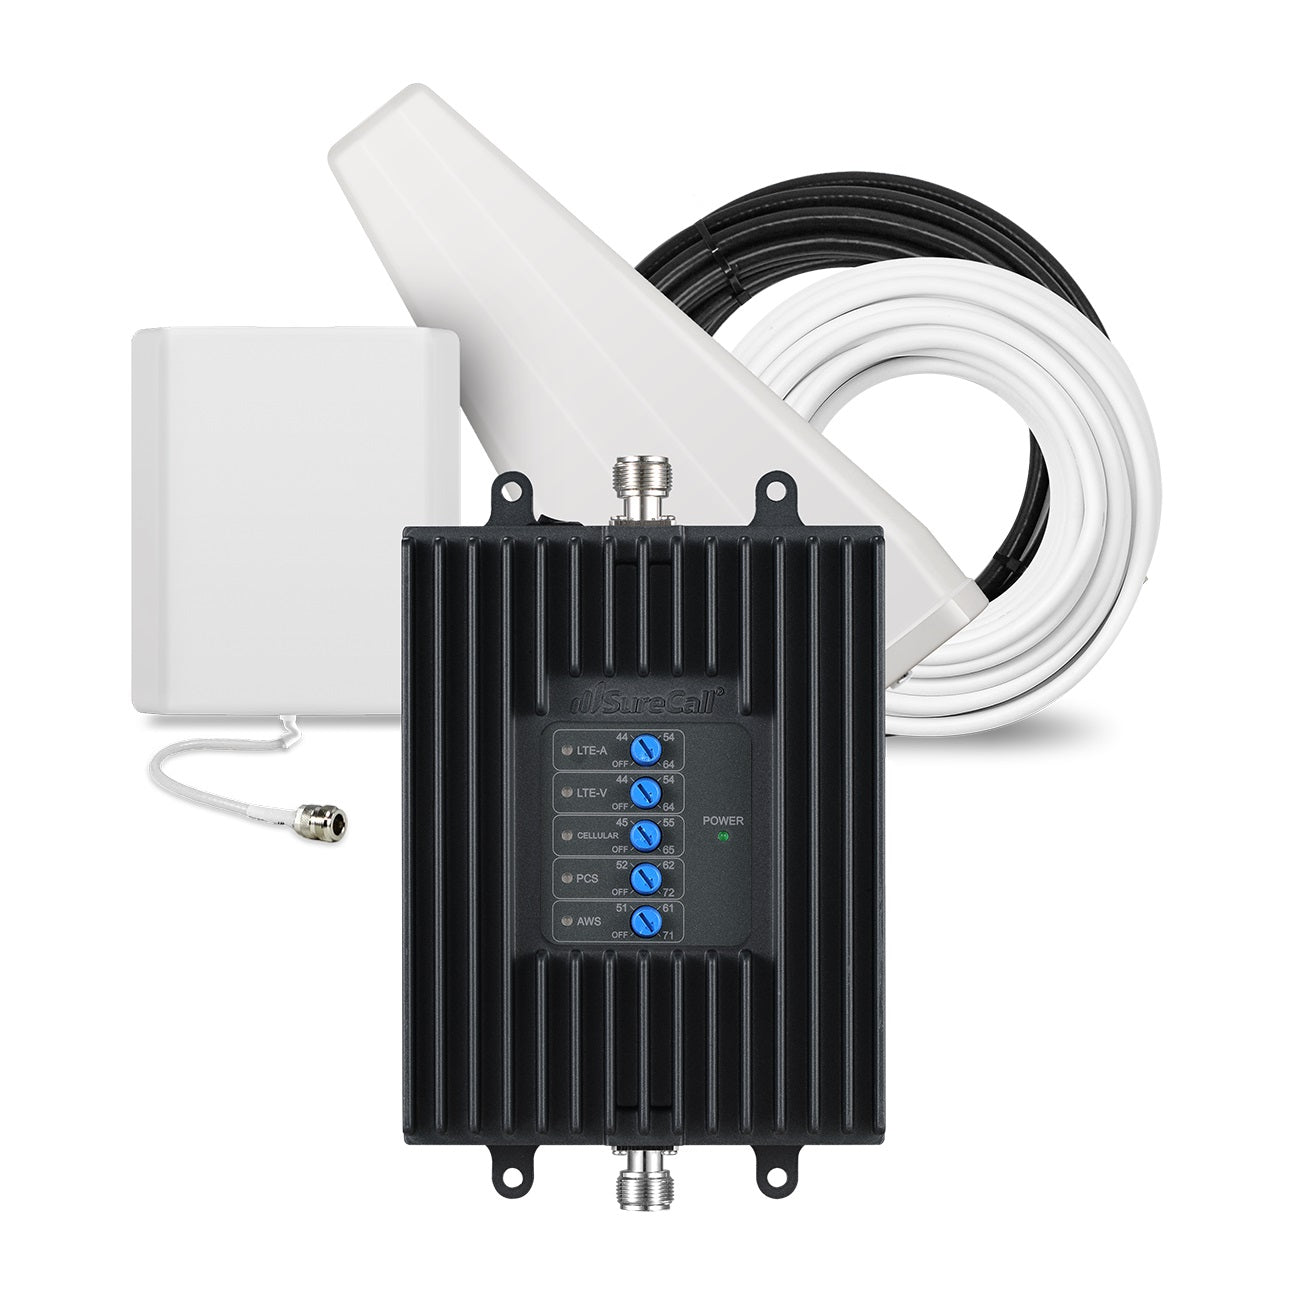 SureCall Fusion Professional Cell Phone Signal Booster Kit for Home/Office | Up to 8000 sq ft | All Canadian Carriers 4G/5G - Bell, Rogers, Telus | ISED Approved